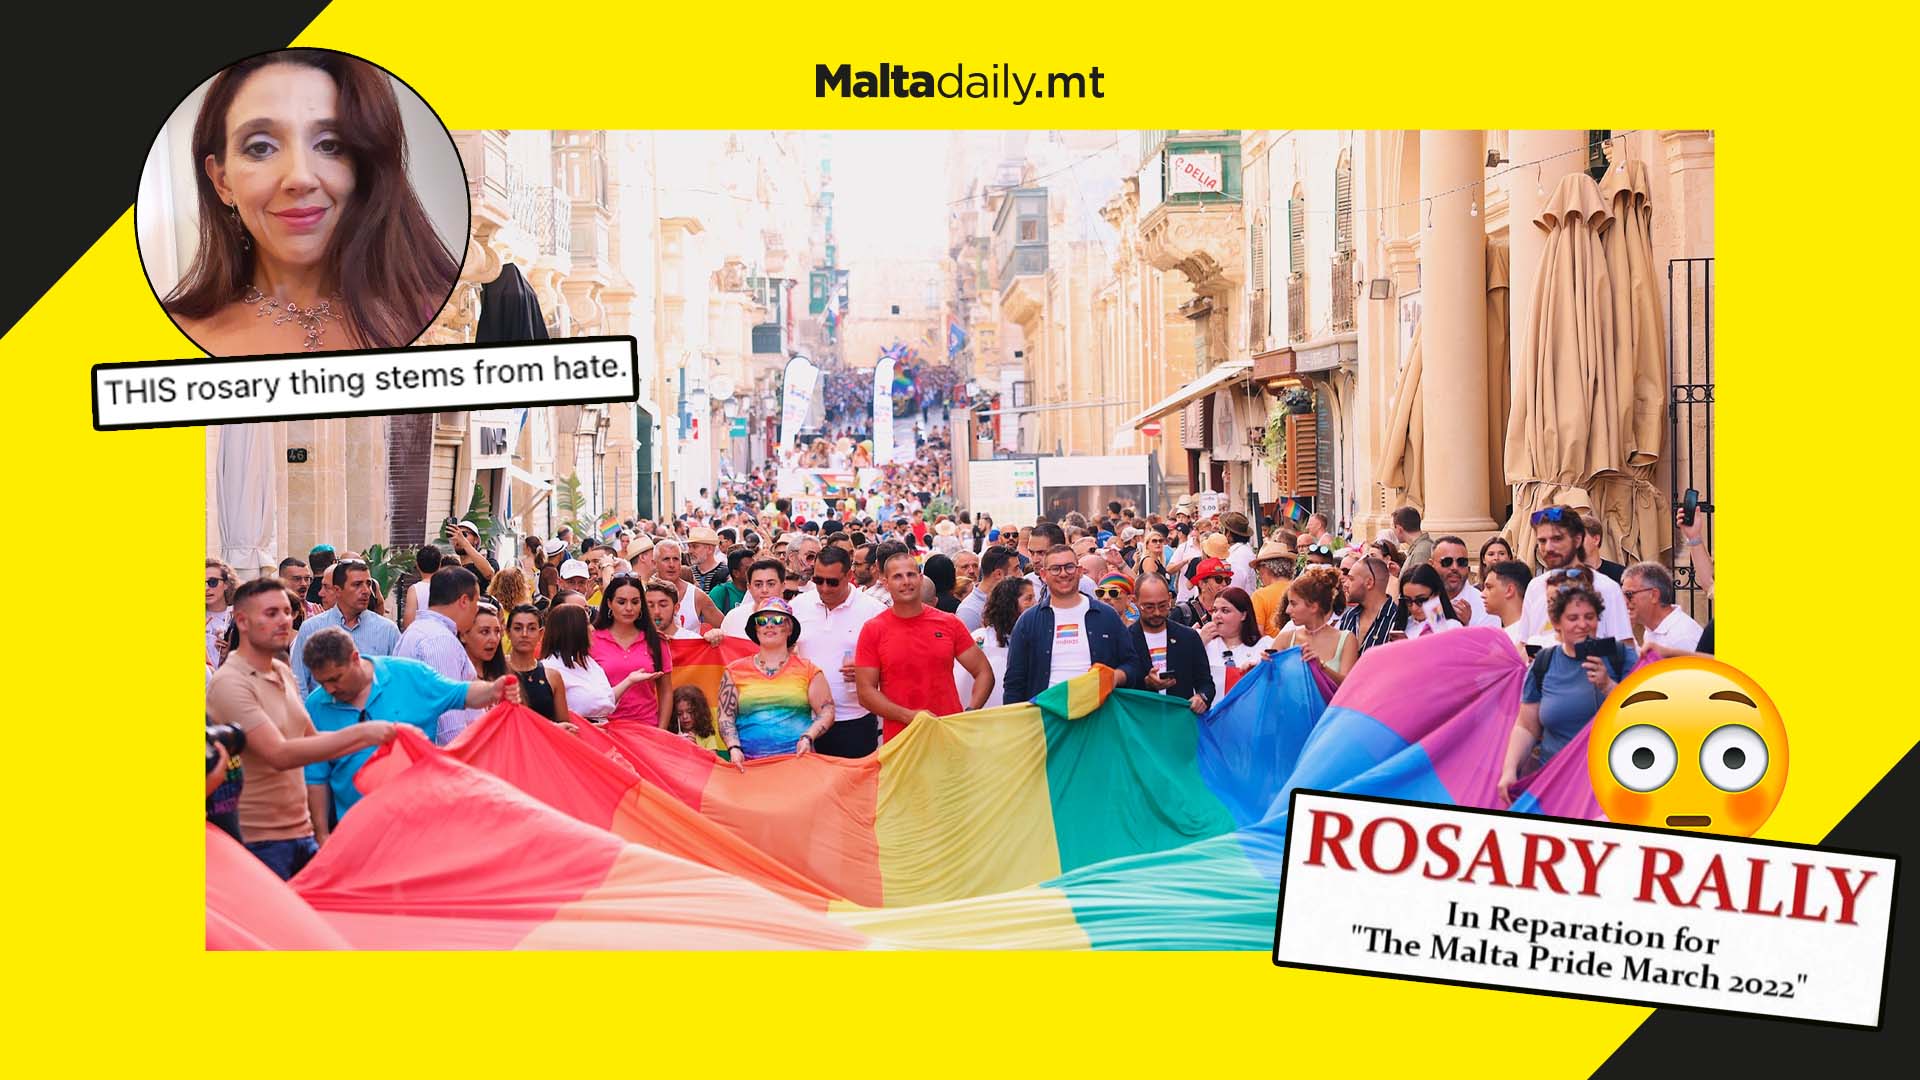 Backlash as Christian group hold rosary rally in ‘Reparation for Pride March’